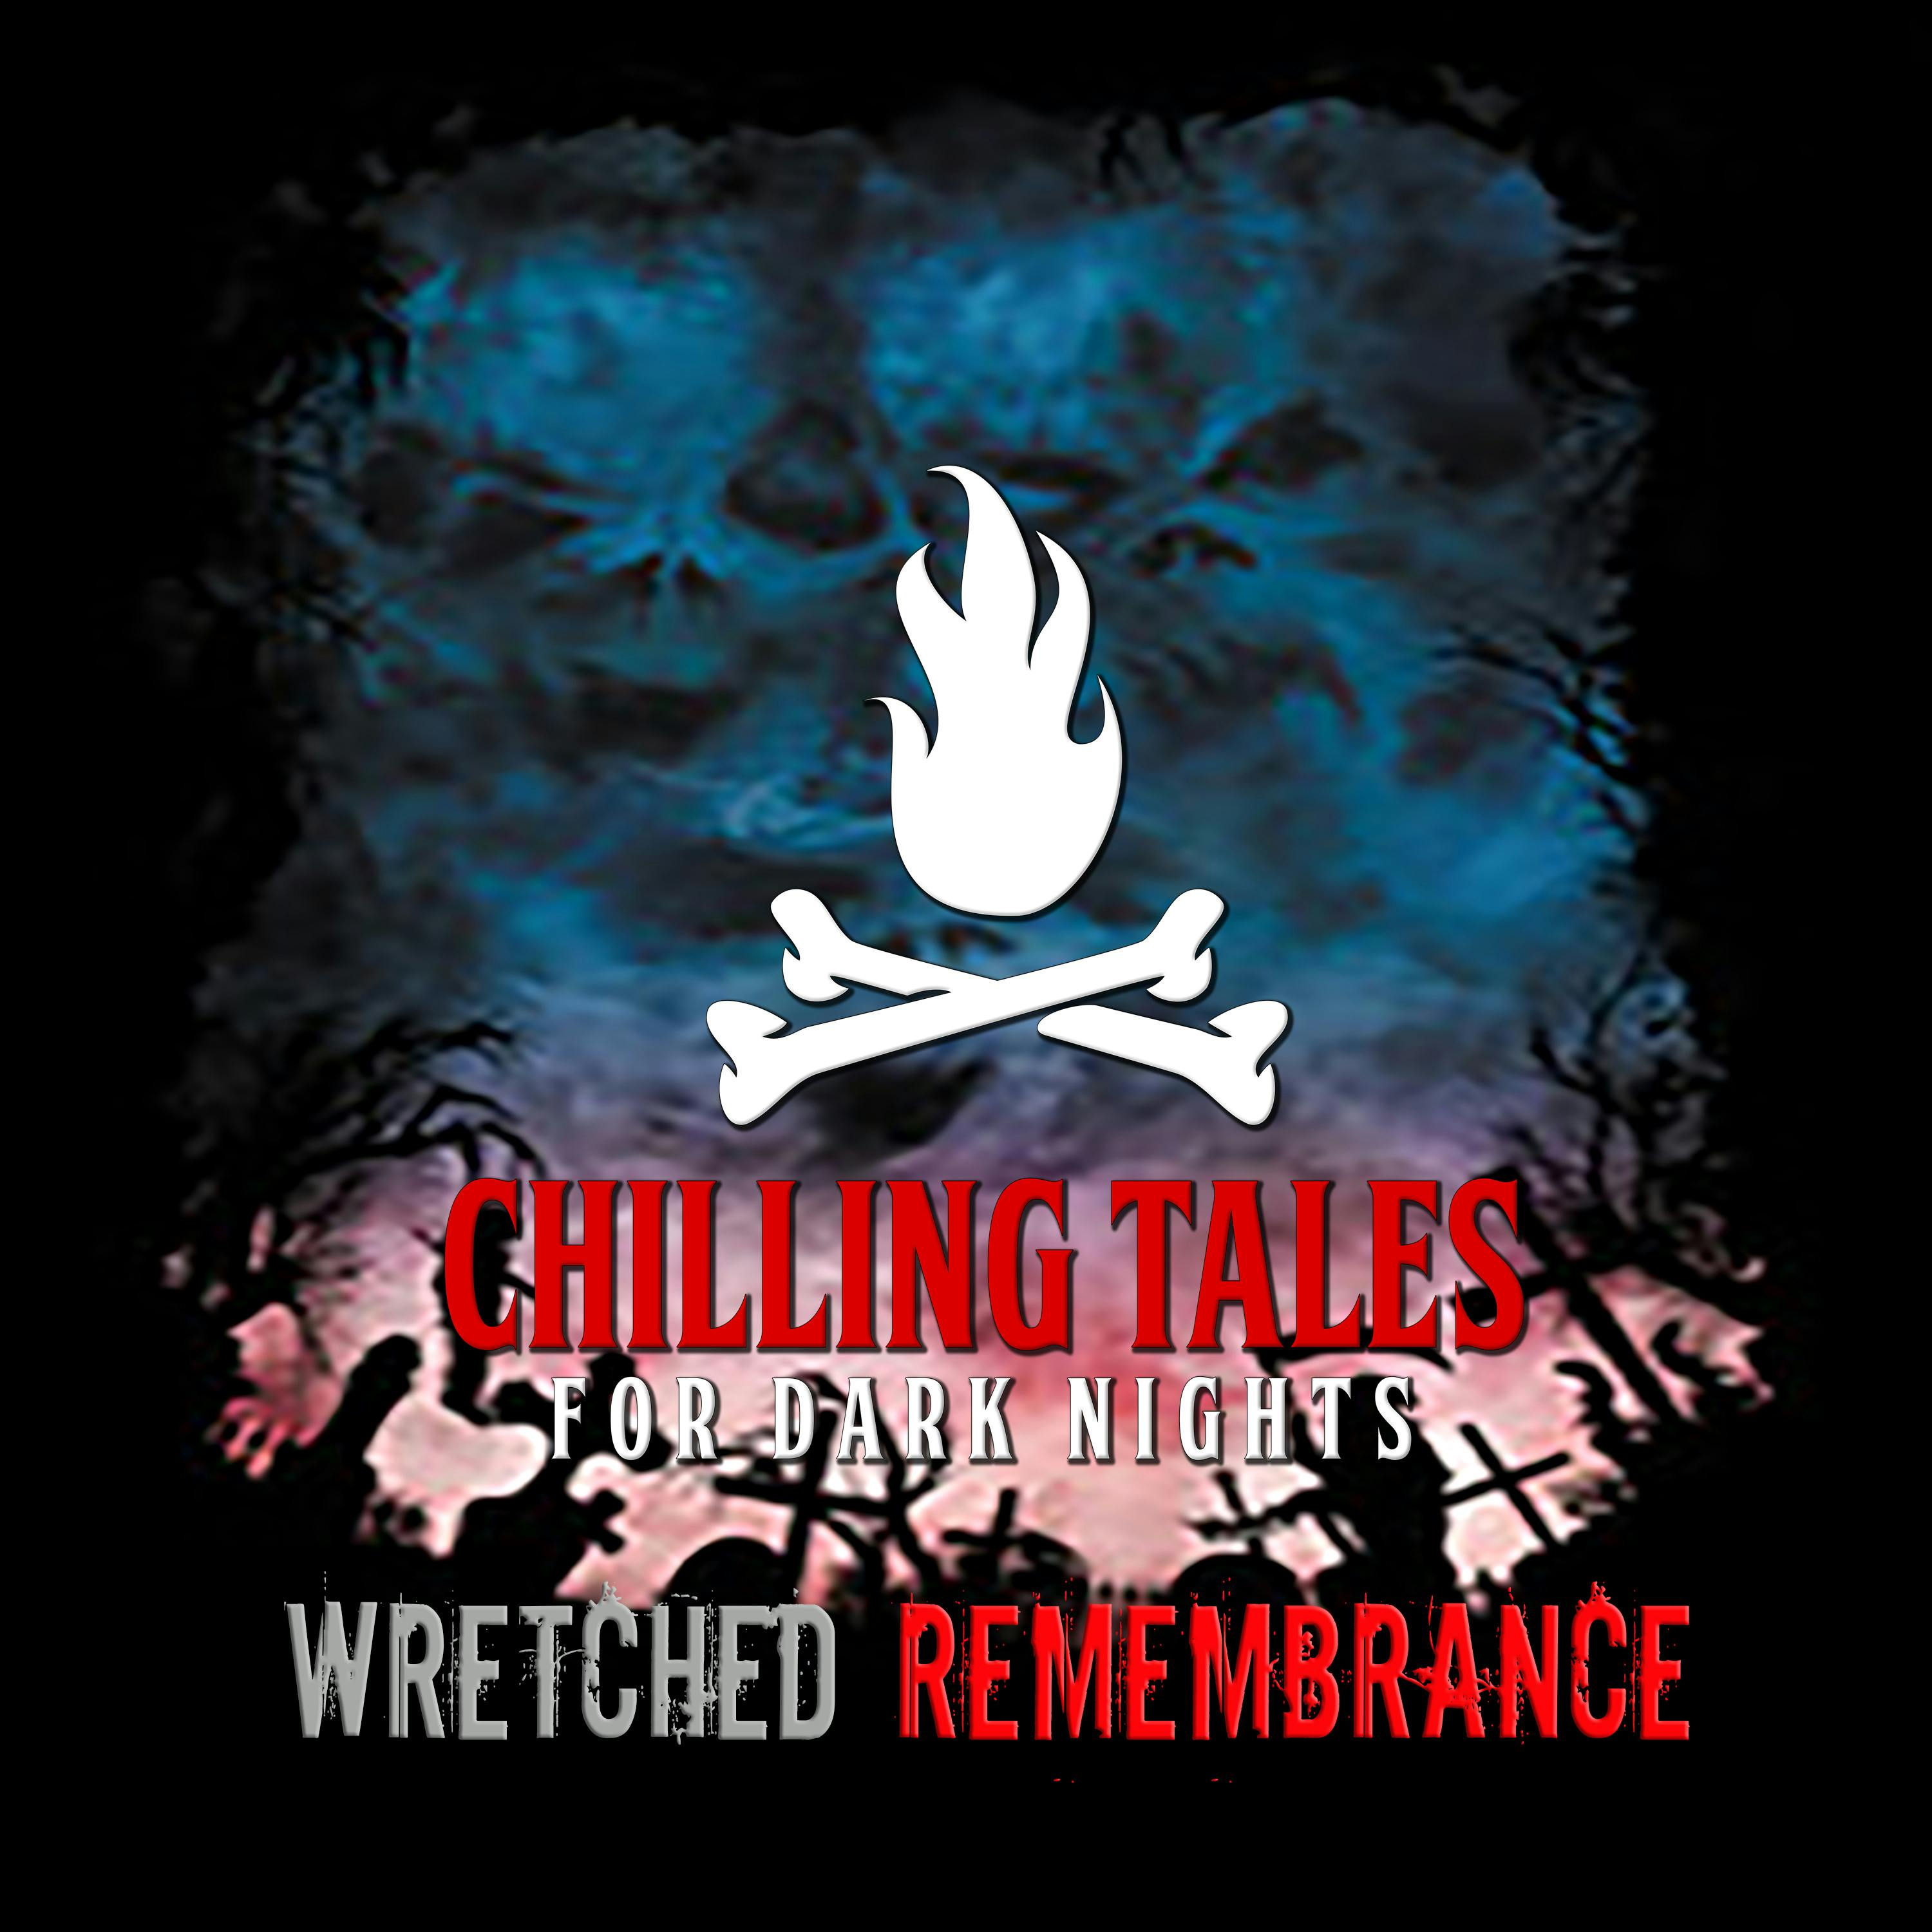 133: Wretched Remembrance - Chilling Tales for Dark Nights